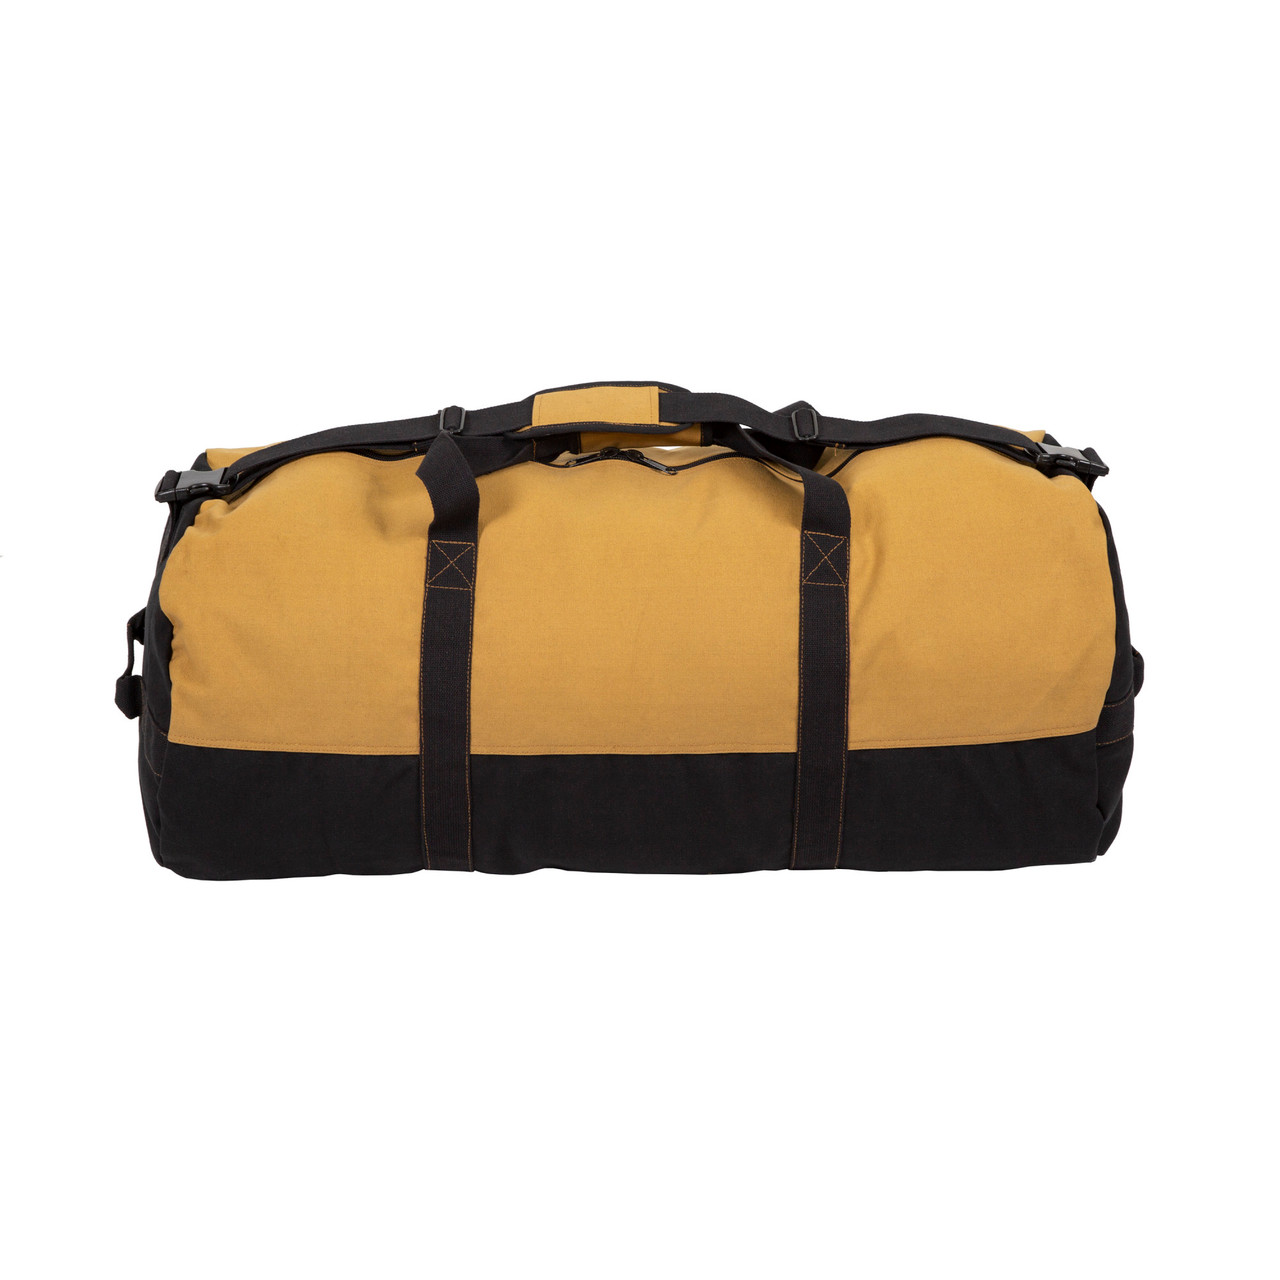 Stansport Canvas Duffle Bag - Two Tone